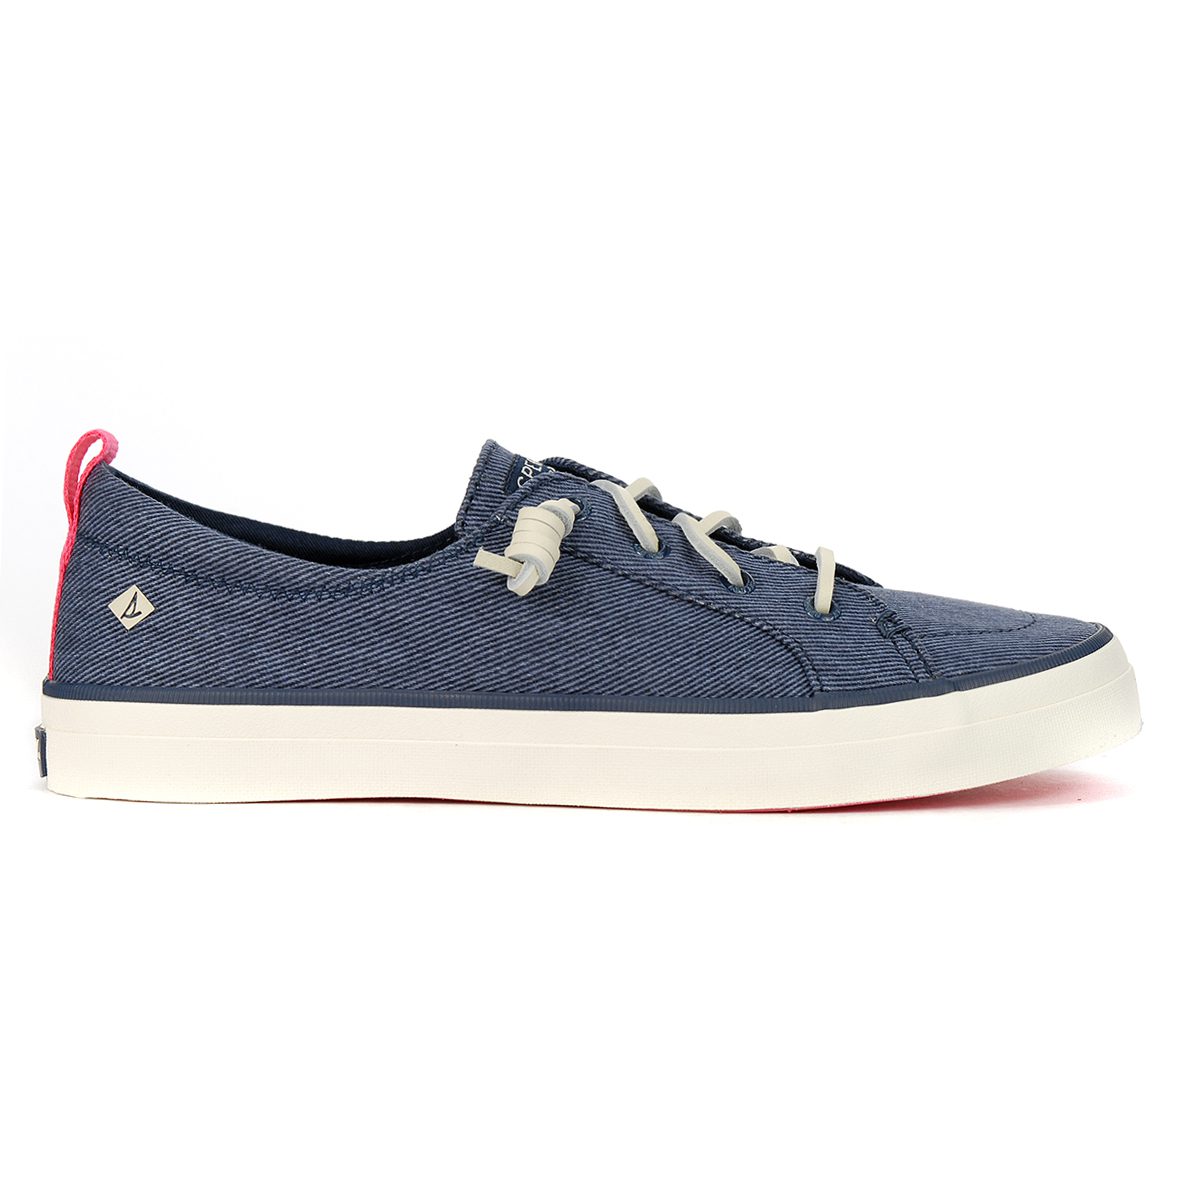 Sperry Women's Crest Vibe Washed Twill Navy Sneakers STS84912 NEW | eBay